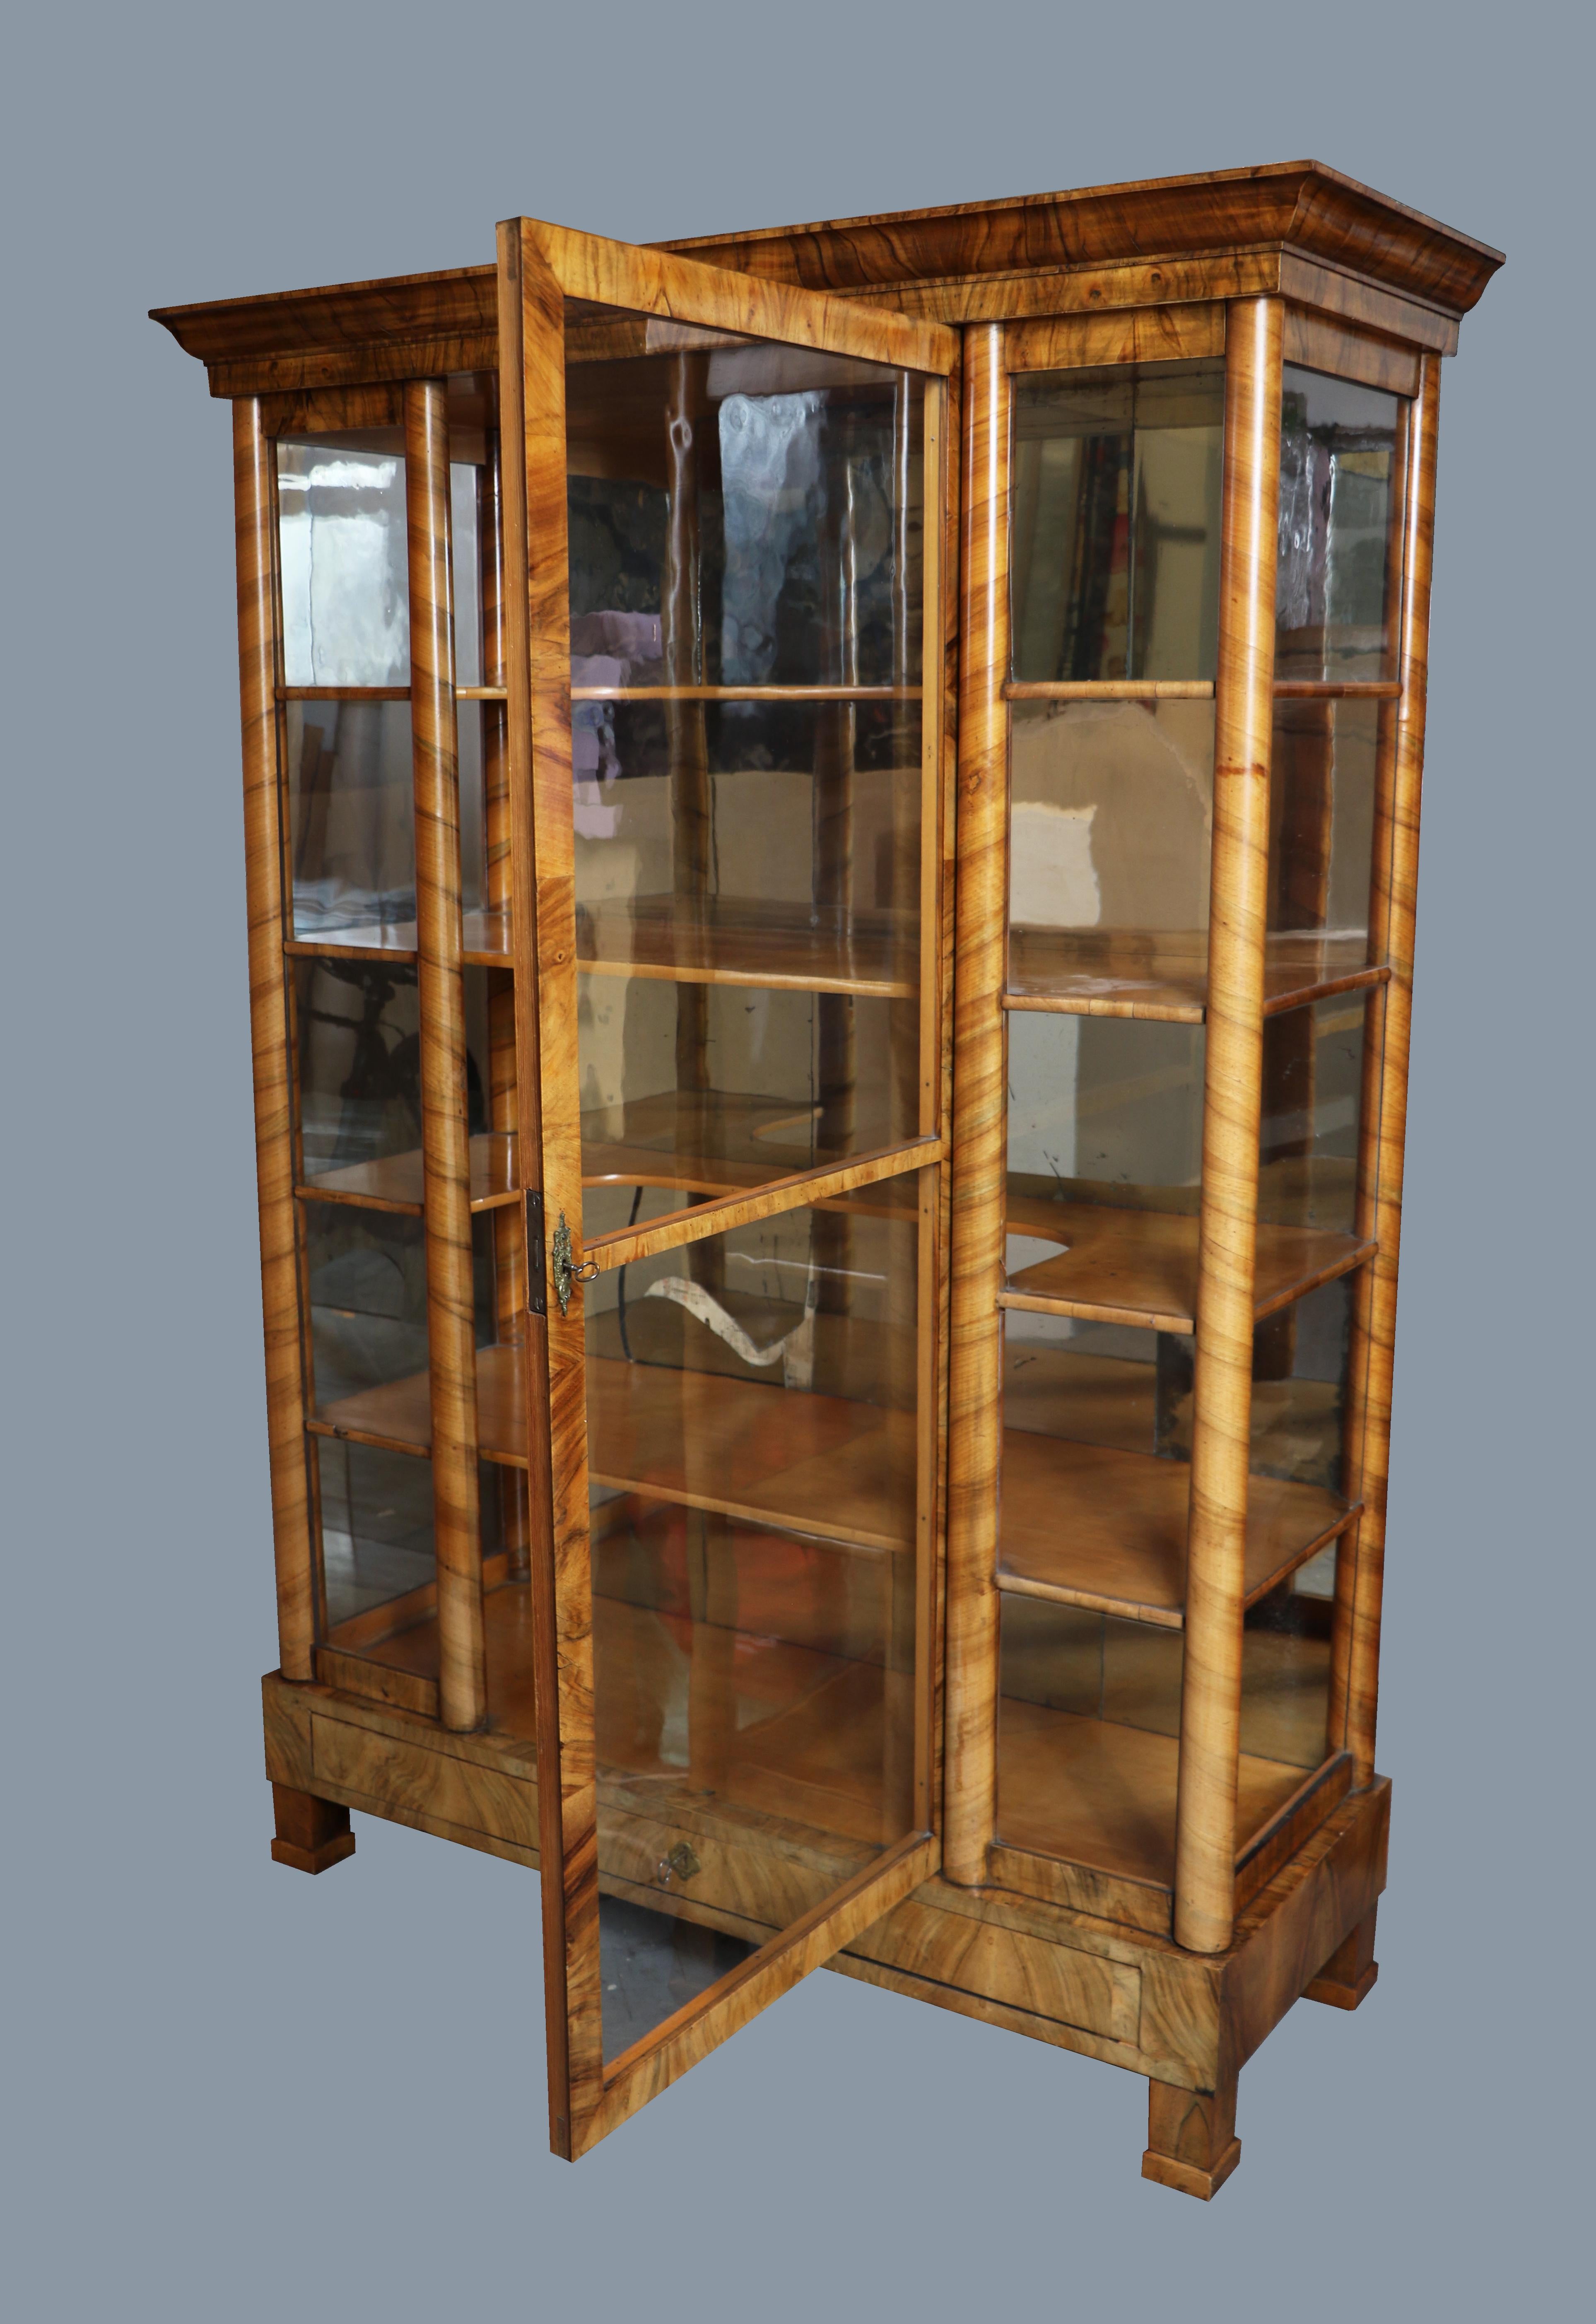 Hello,
We would like to offer you this truly exquisite, early Biedermeier walnut vitrine. The piece was made in Vienna circa 1820-25.

Viennese Biedermeier is distinguished by their sophisticated proportions, rare and refined design and excellent